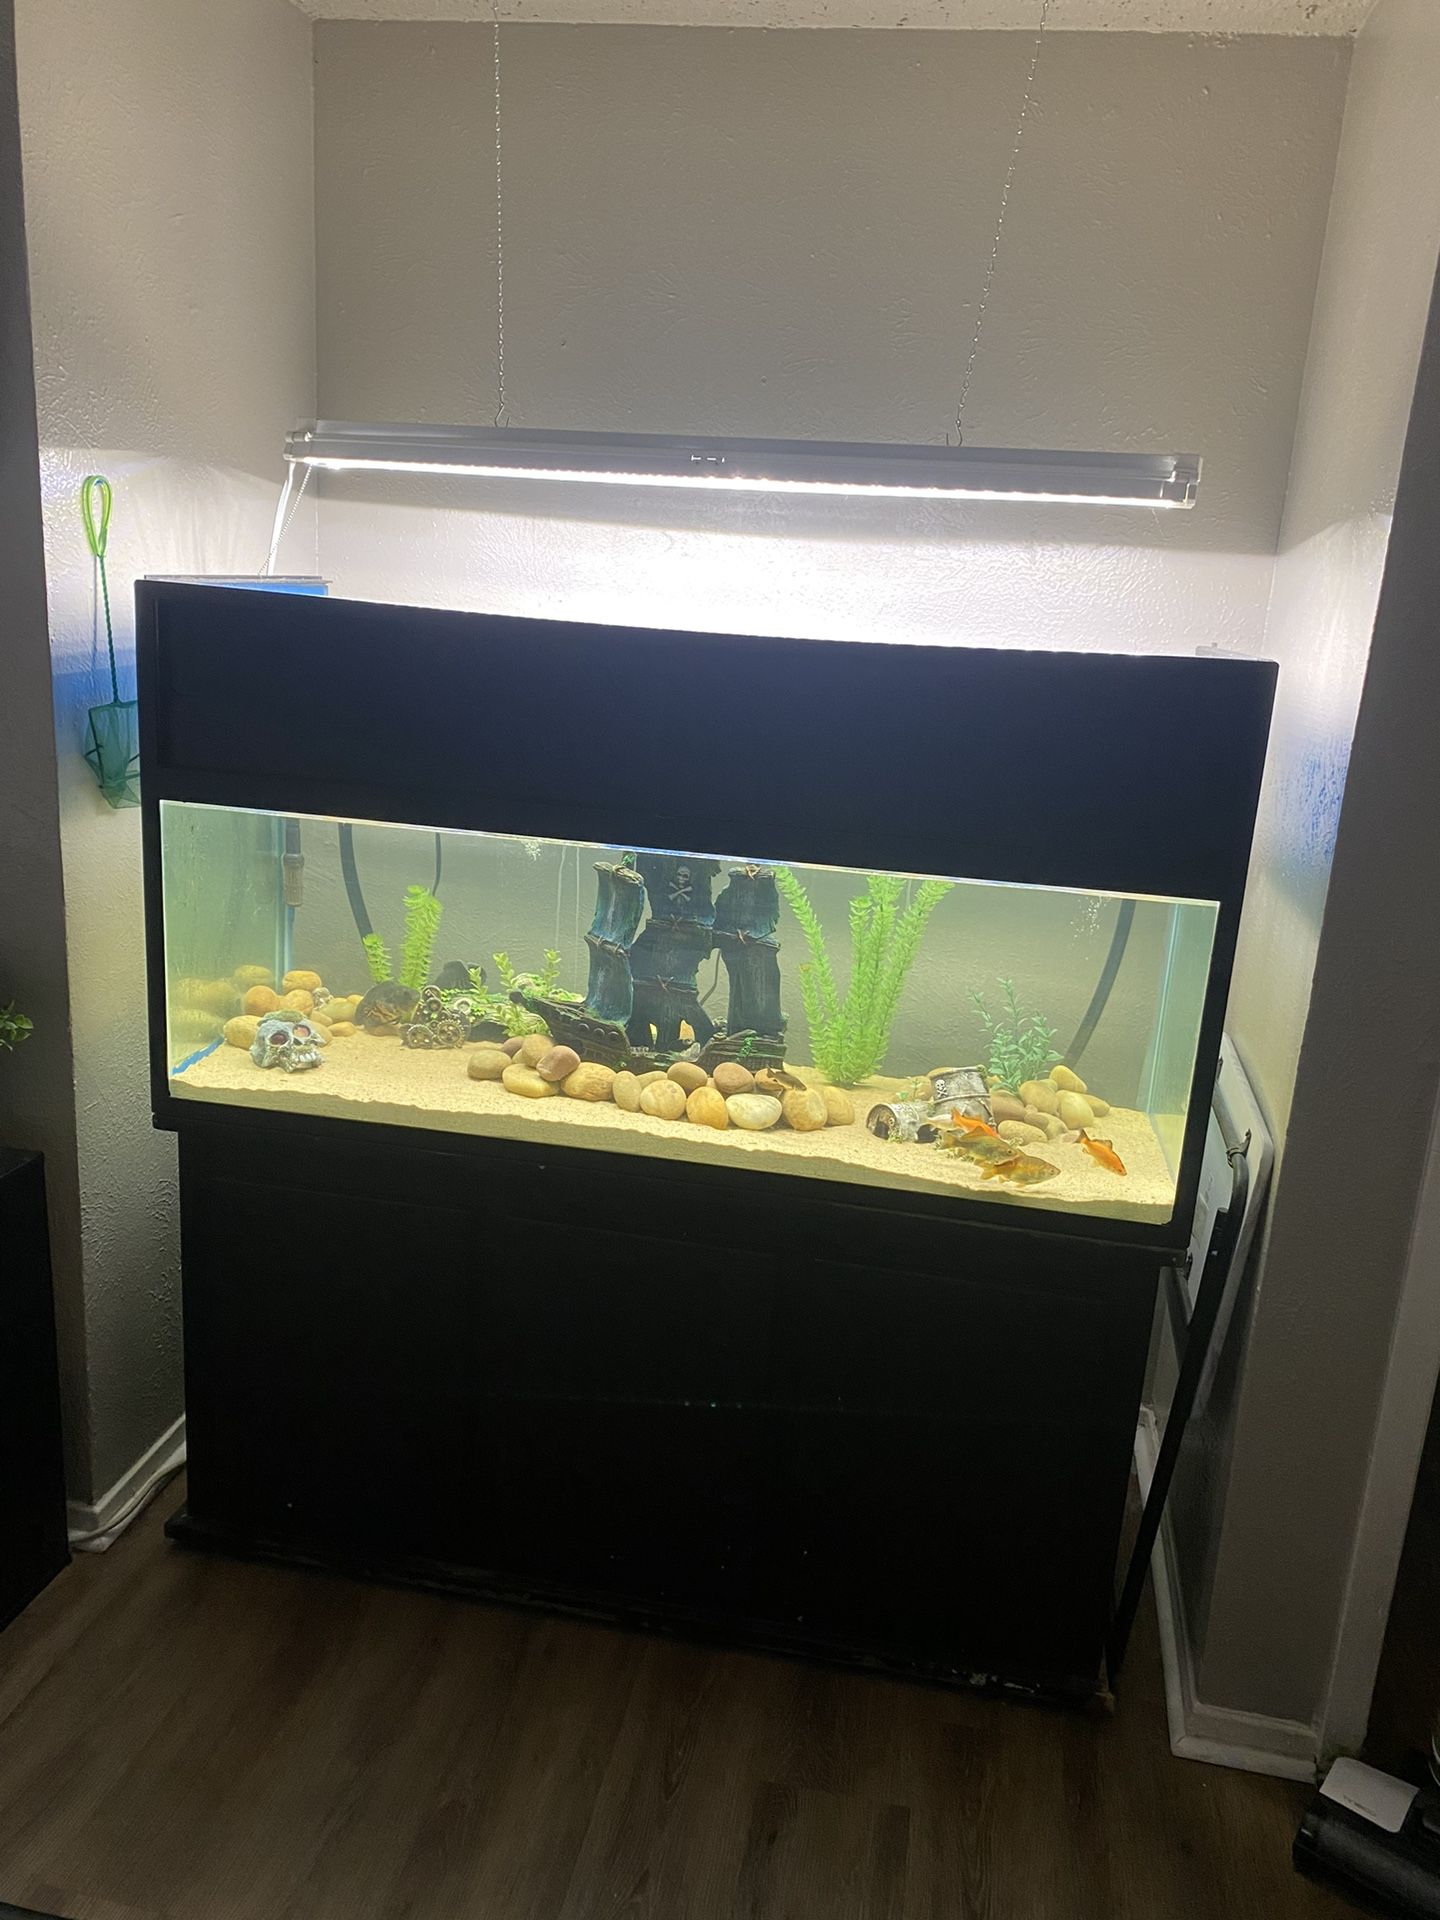 75 Gallon Fish Tank Everything Included!